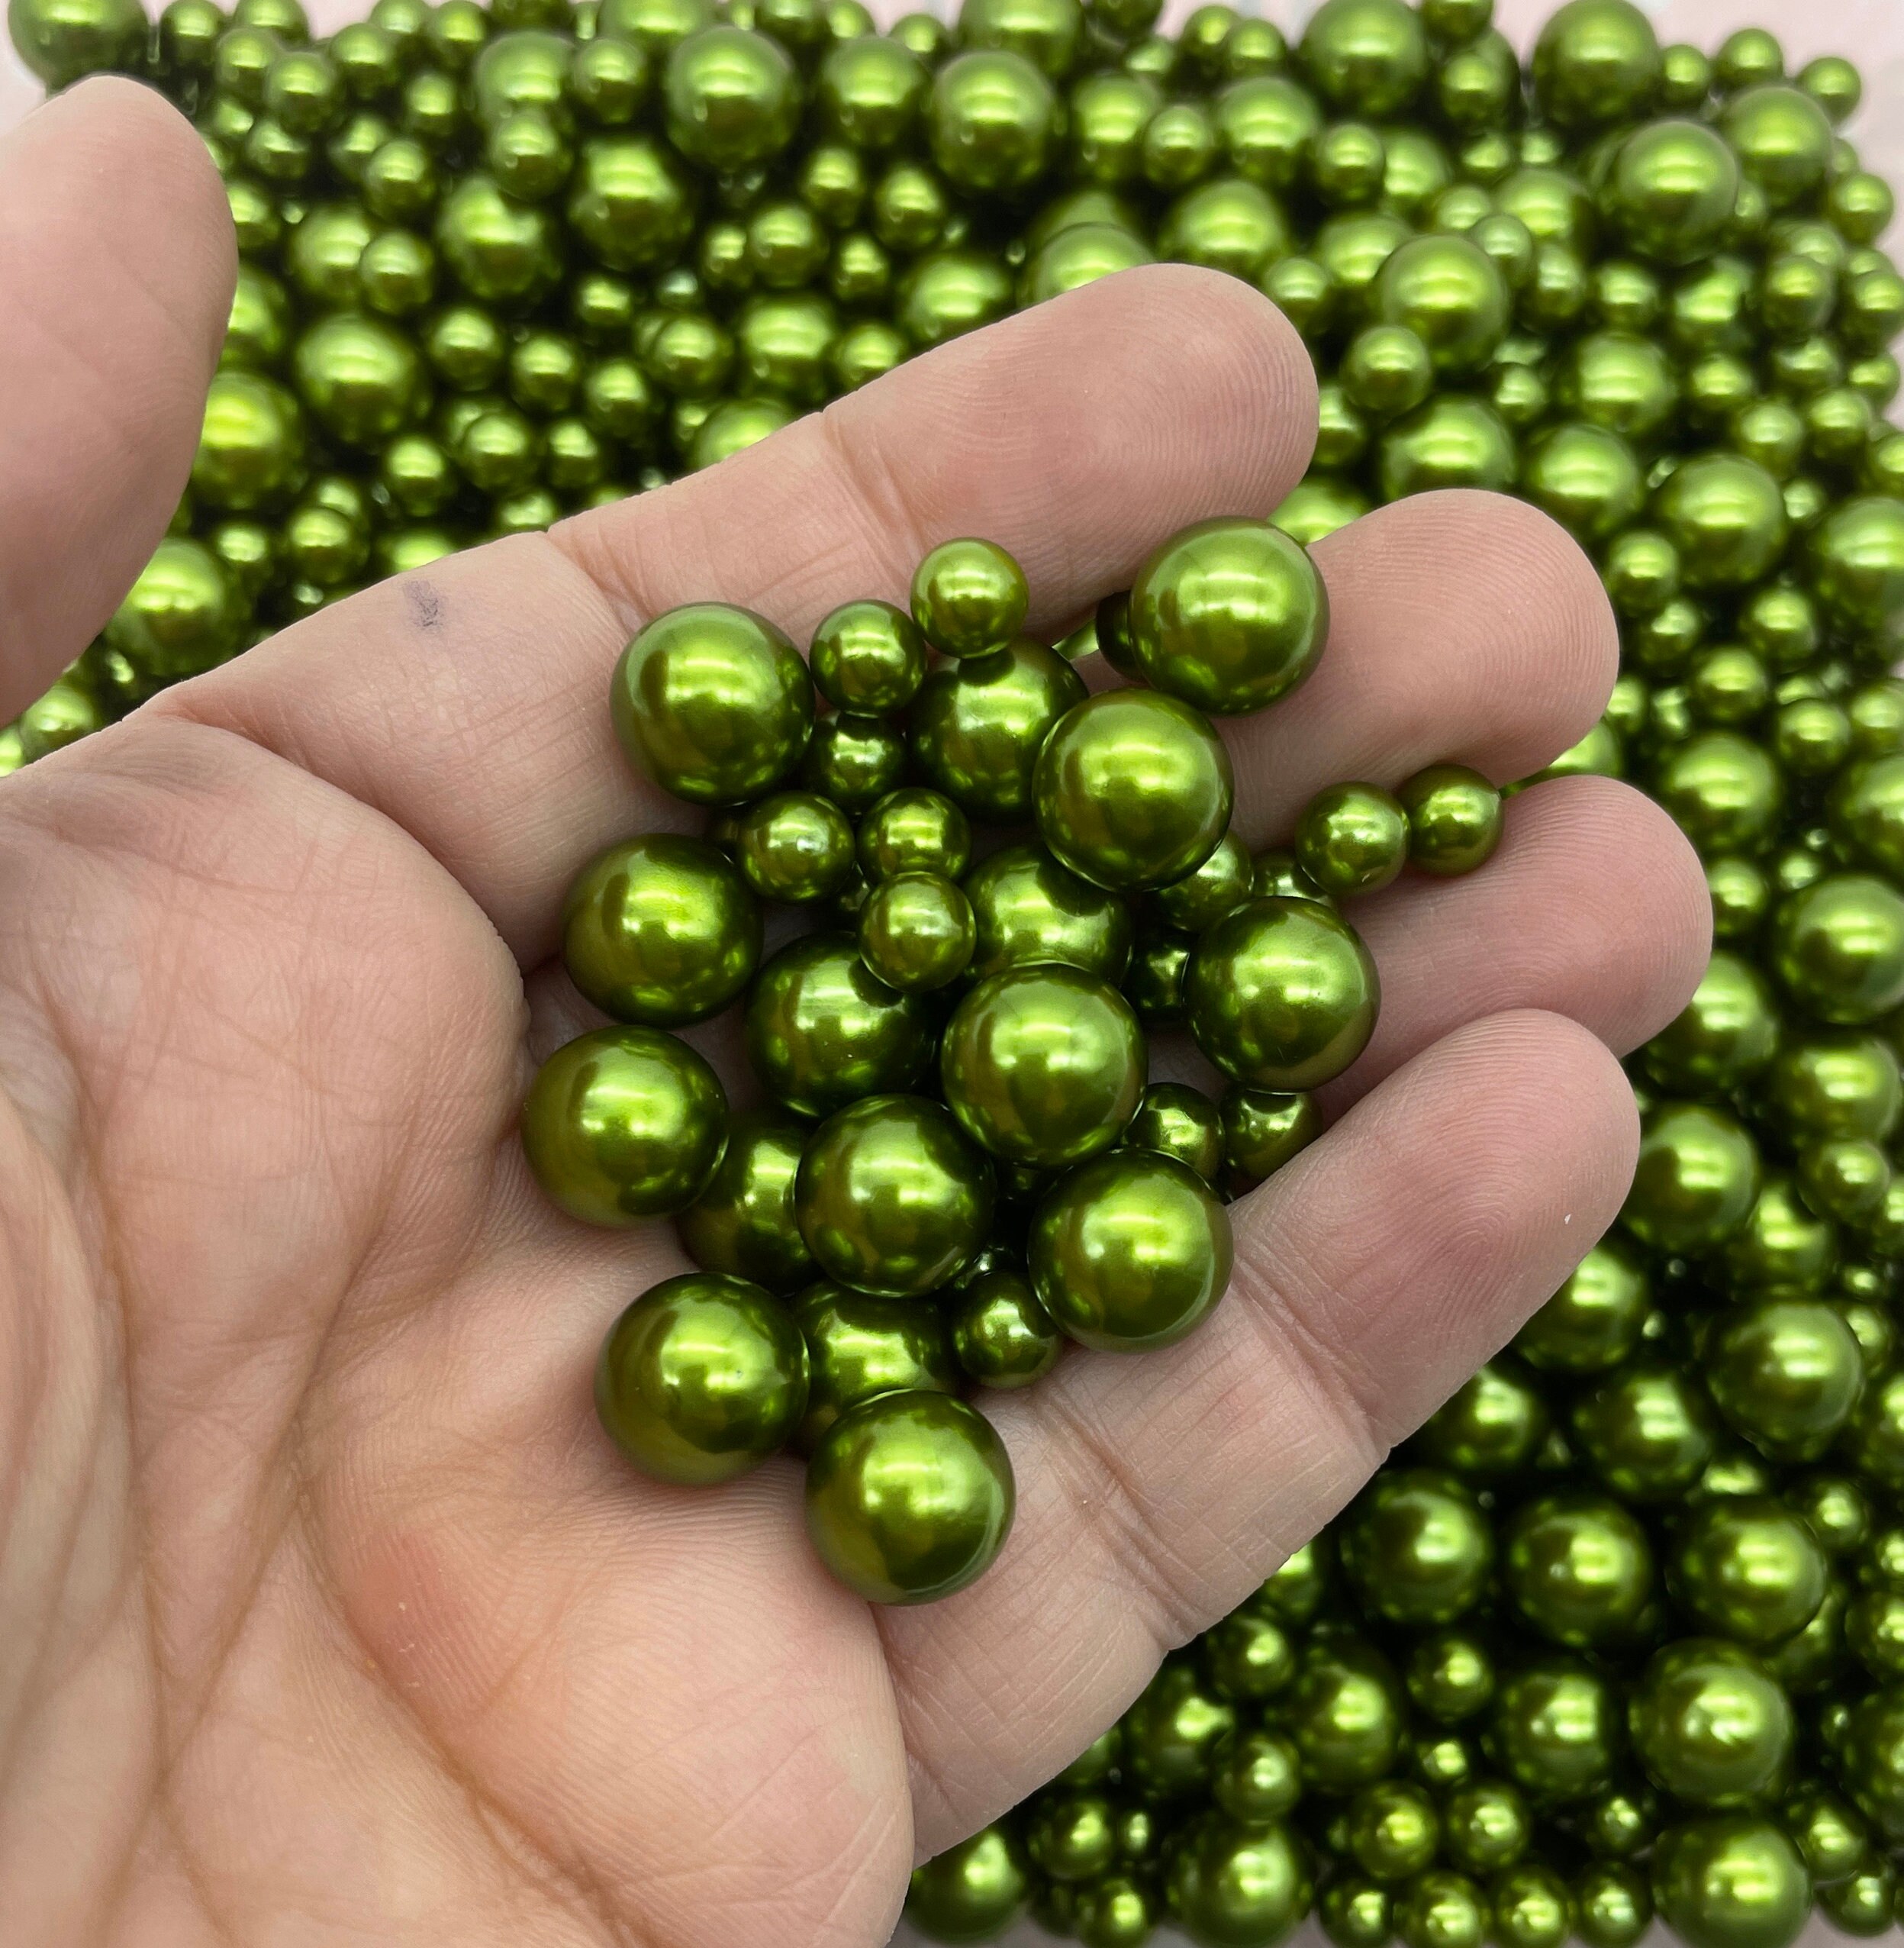 GREEN PEARLS, No Hole Fake Pearls, Multisize Faux Nonpareil Acrylic  Dragees, Opaque Caviar Bead Pearls, K25 